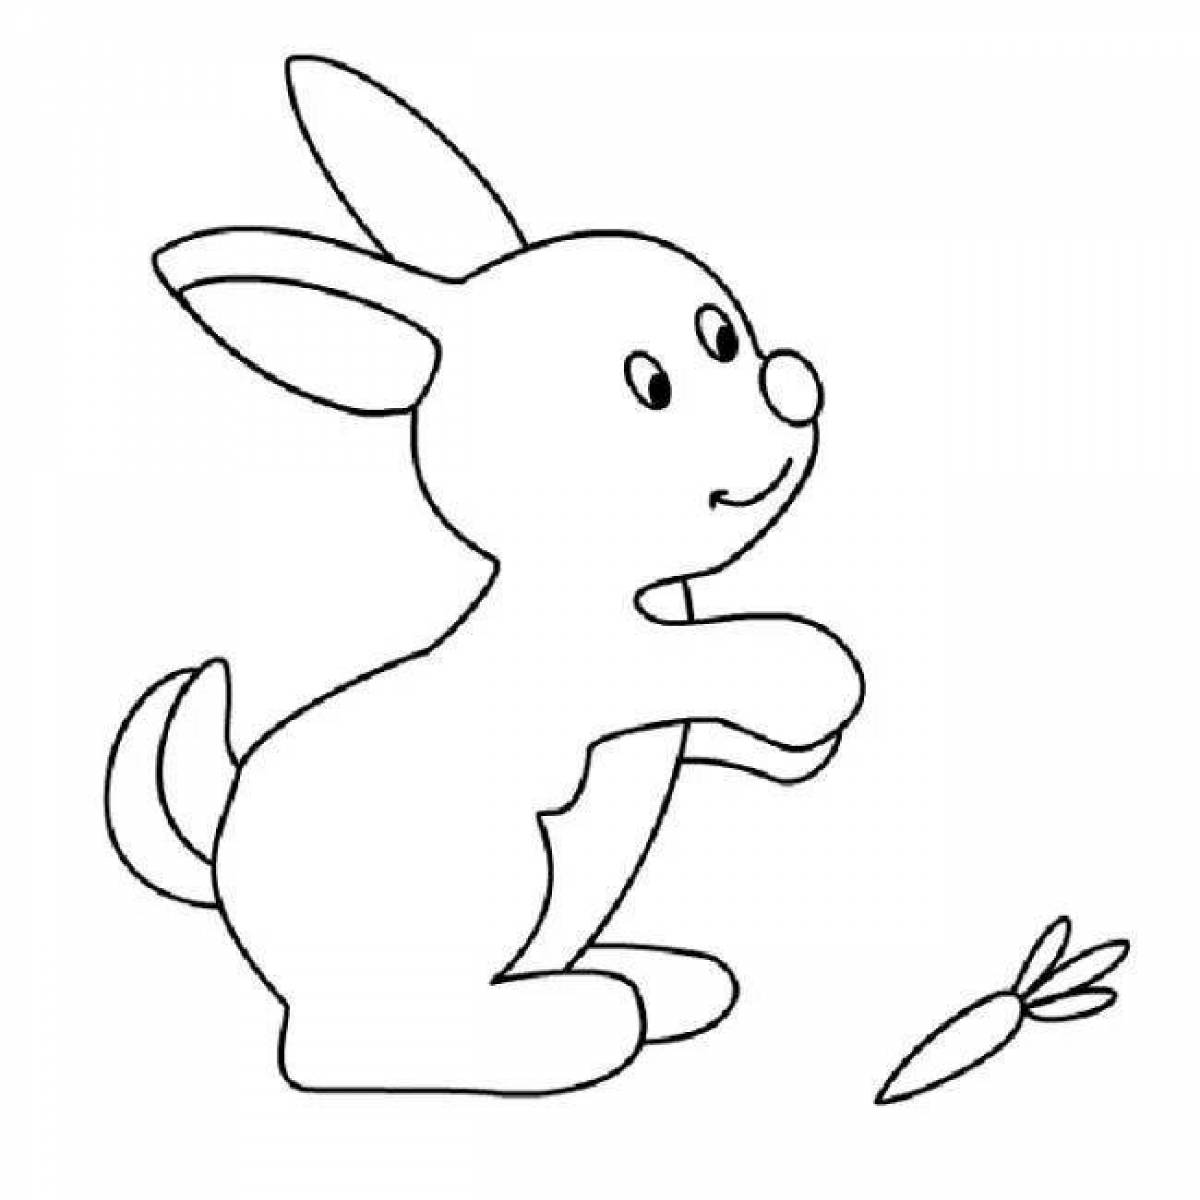 Fuzzy outline of a coloring rabbit